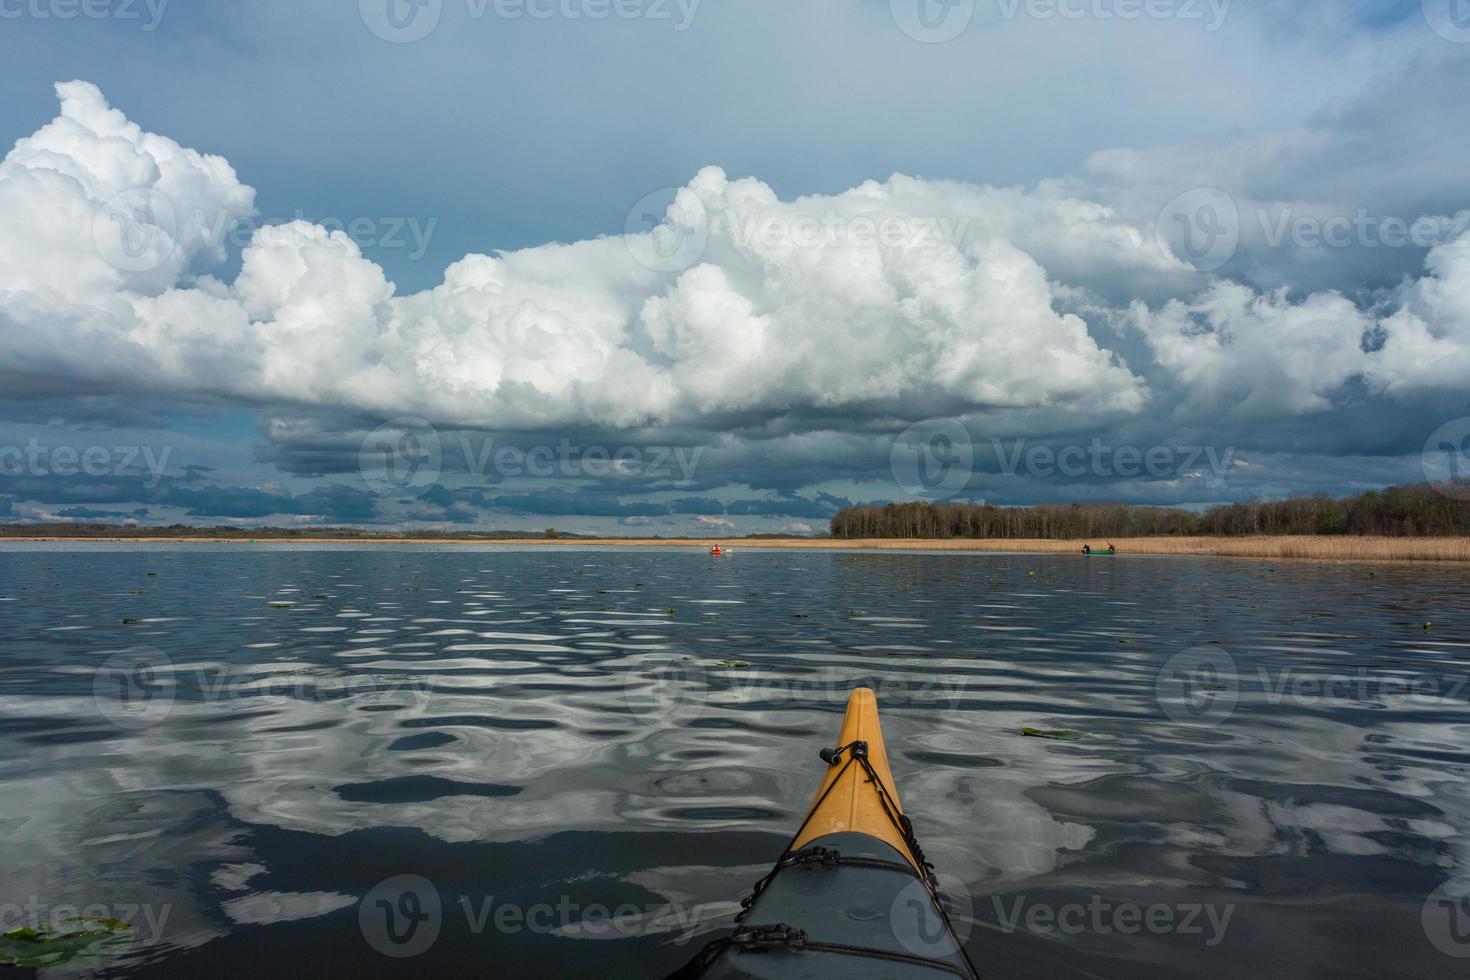 Cloudy Landscape in the Lake photo